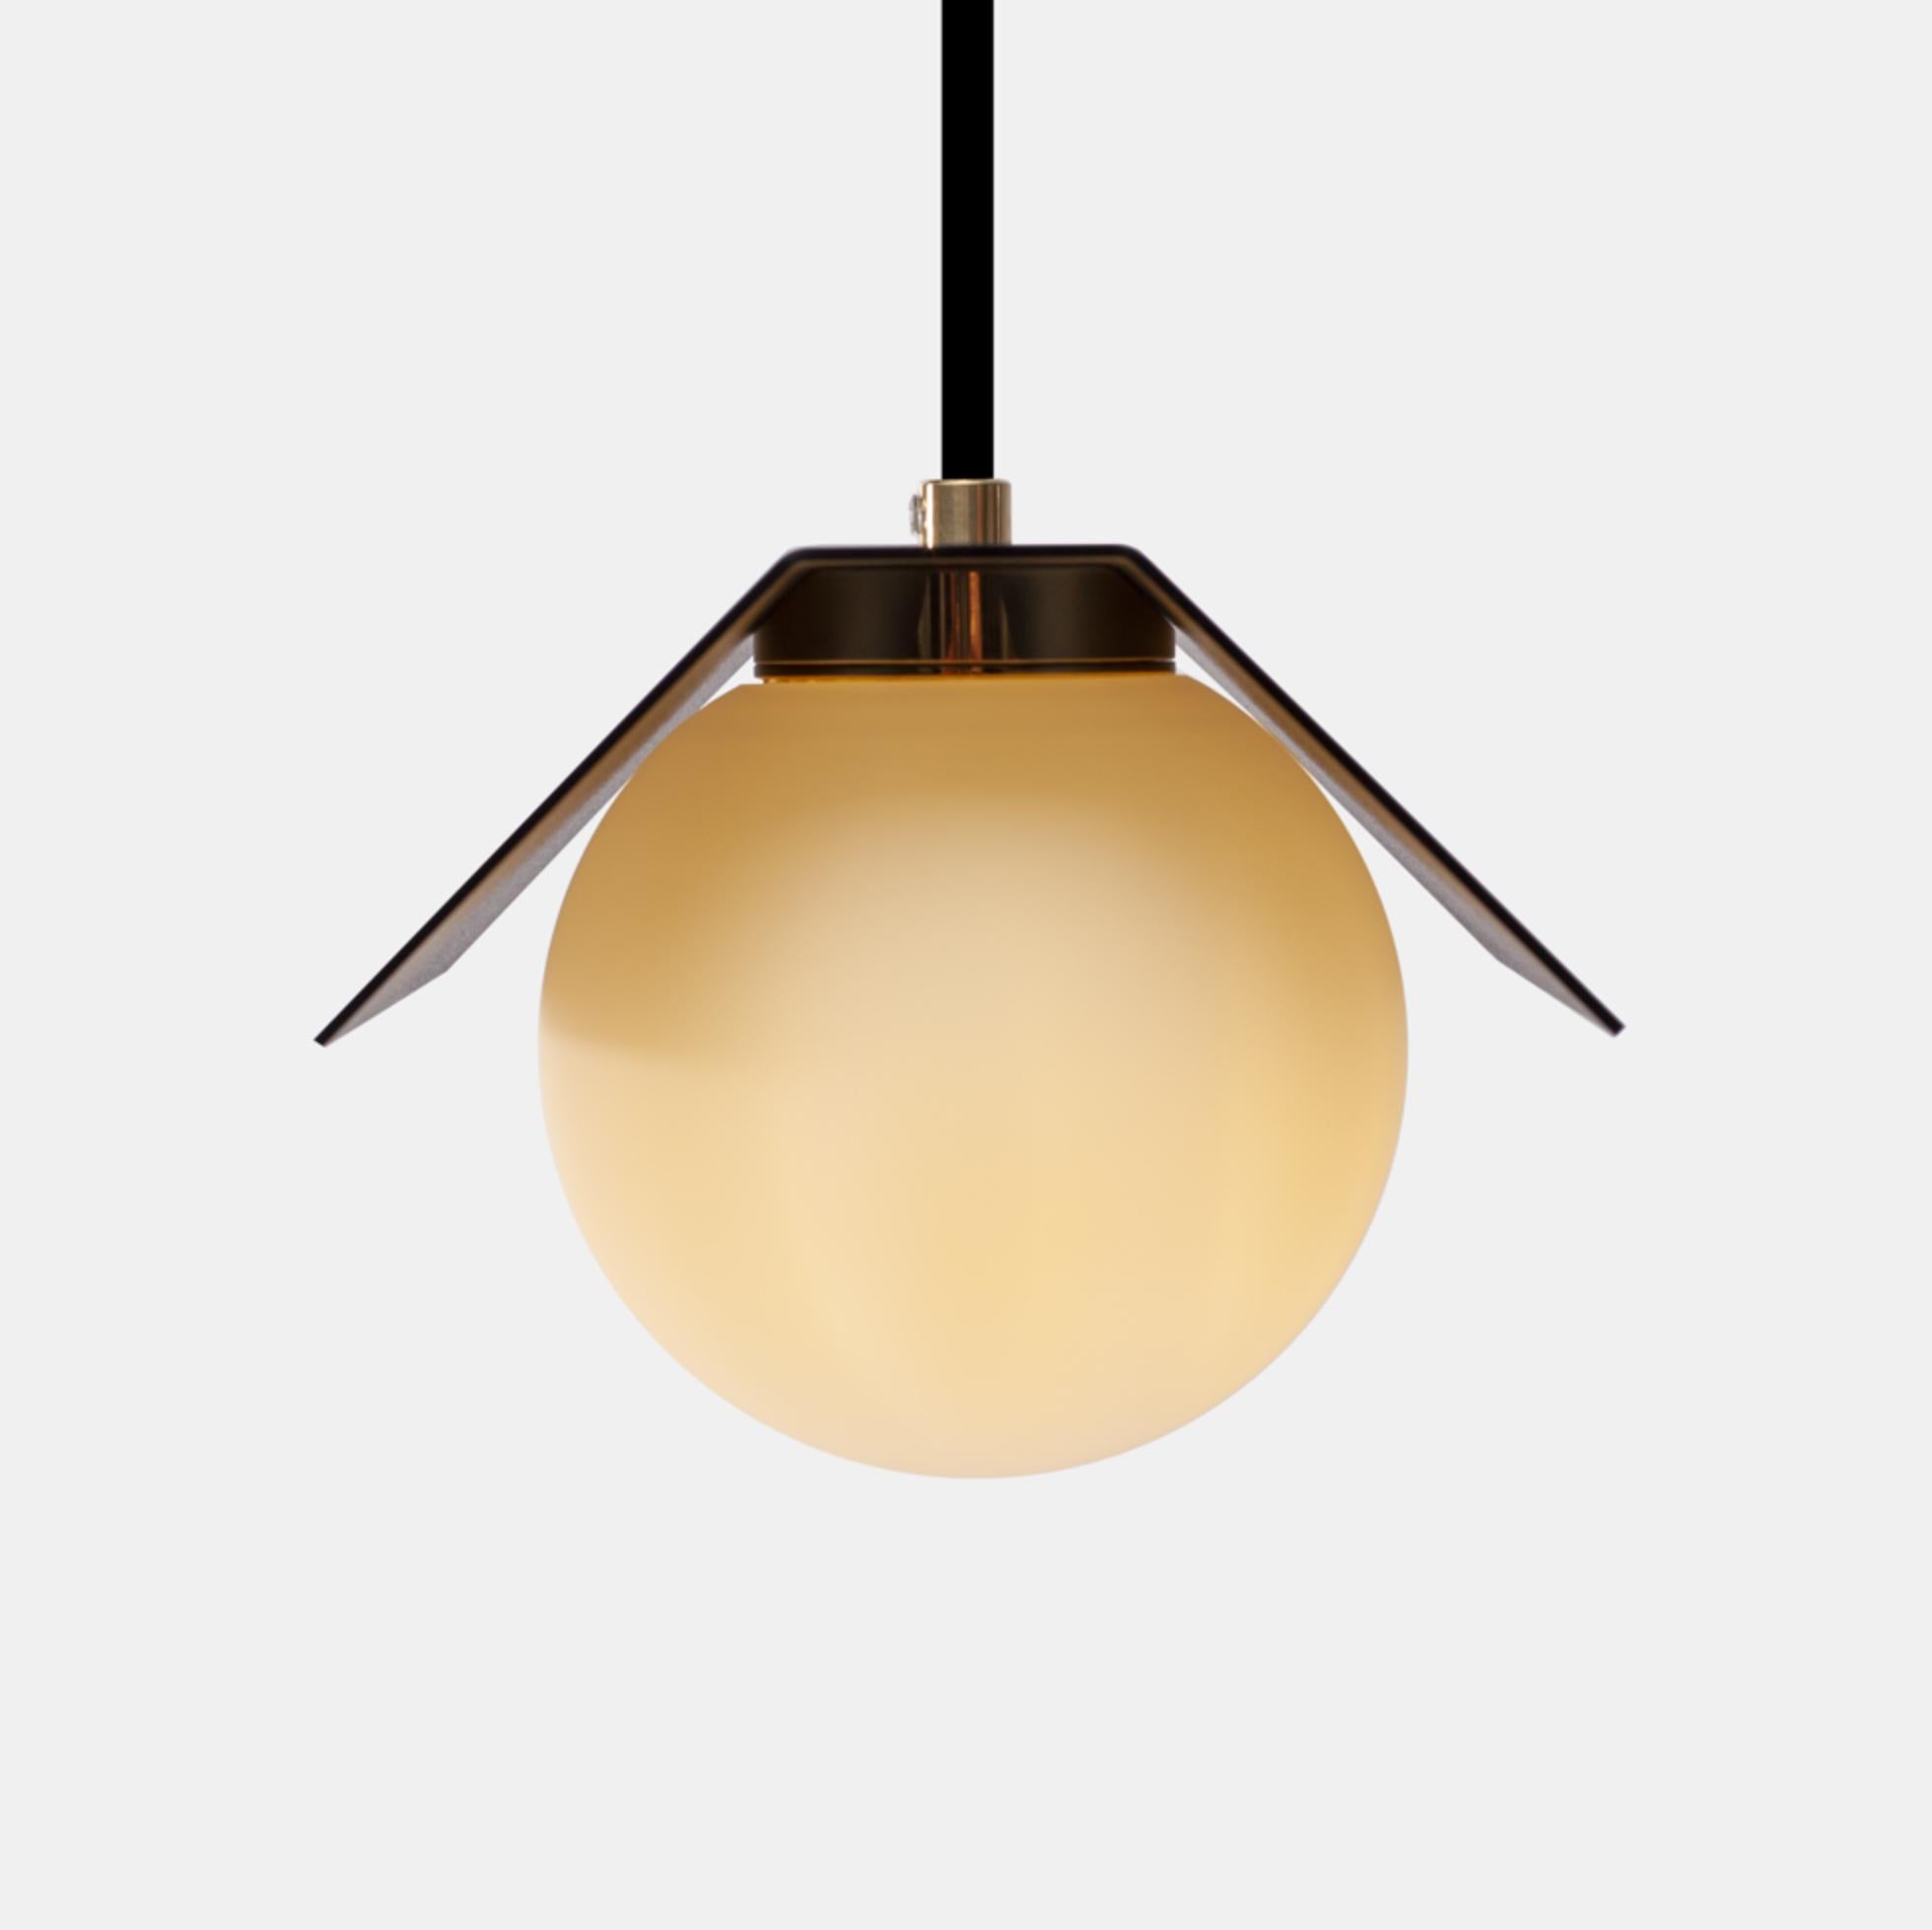 Twain Ex jet black suspended light by Lexavala
Dimensions: W 16 x D 16 x H 13 cm 
Materials: brass or stainless steel ring touching the glass.

There are two lenghts of socket covers, extending over the LED. Two short are to be found in